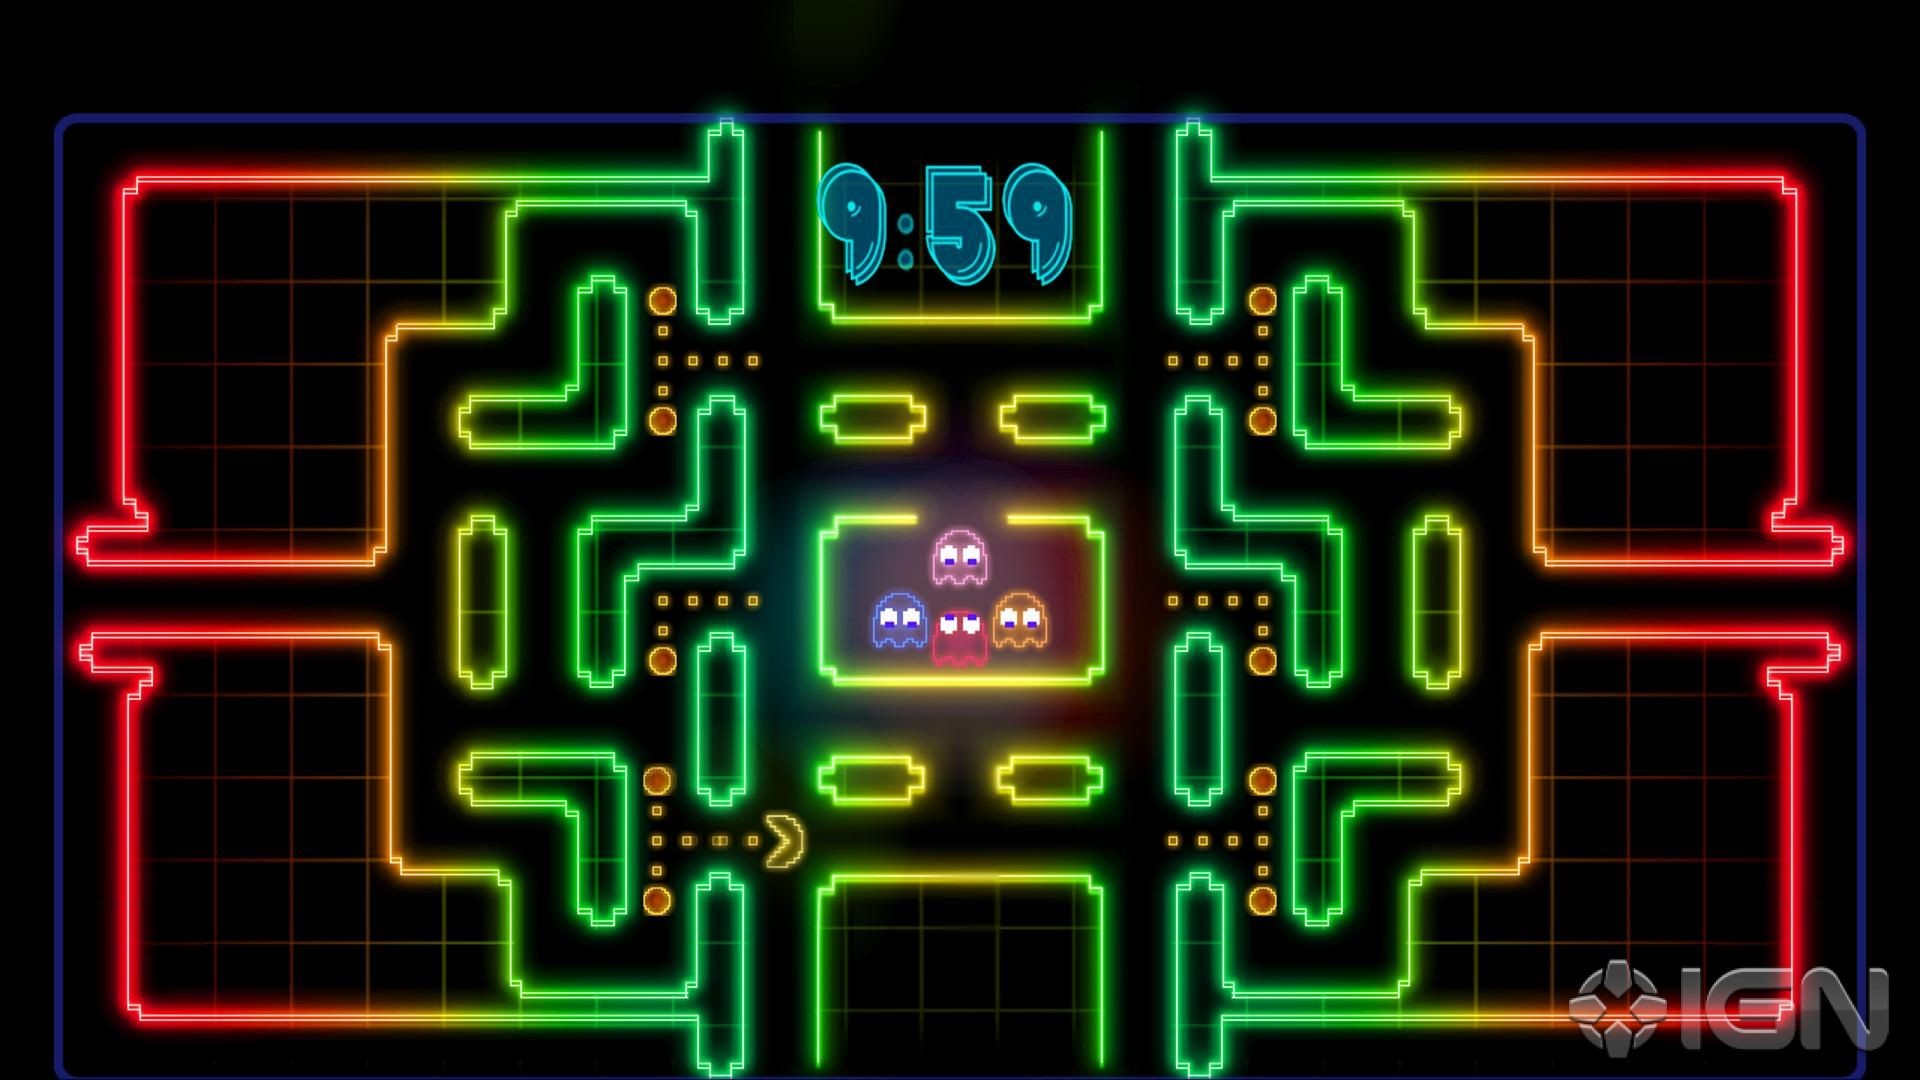 1920x1080 Pac-Man Championship Edition DX Screenshots, Pictures, Wallpapers -  PlayStation 3 - IGN